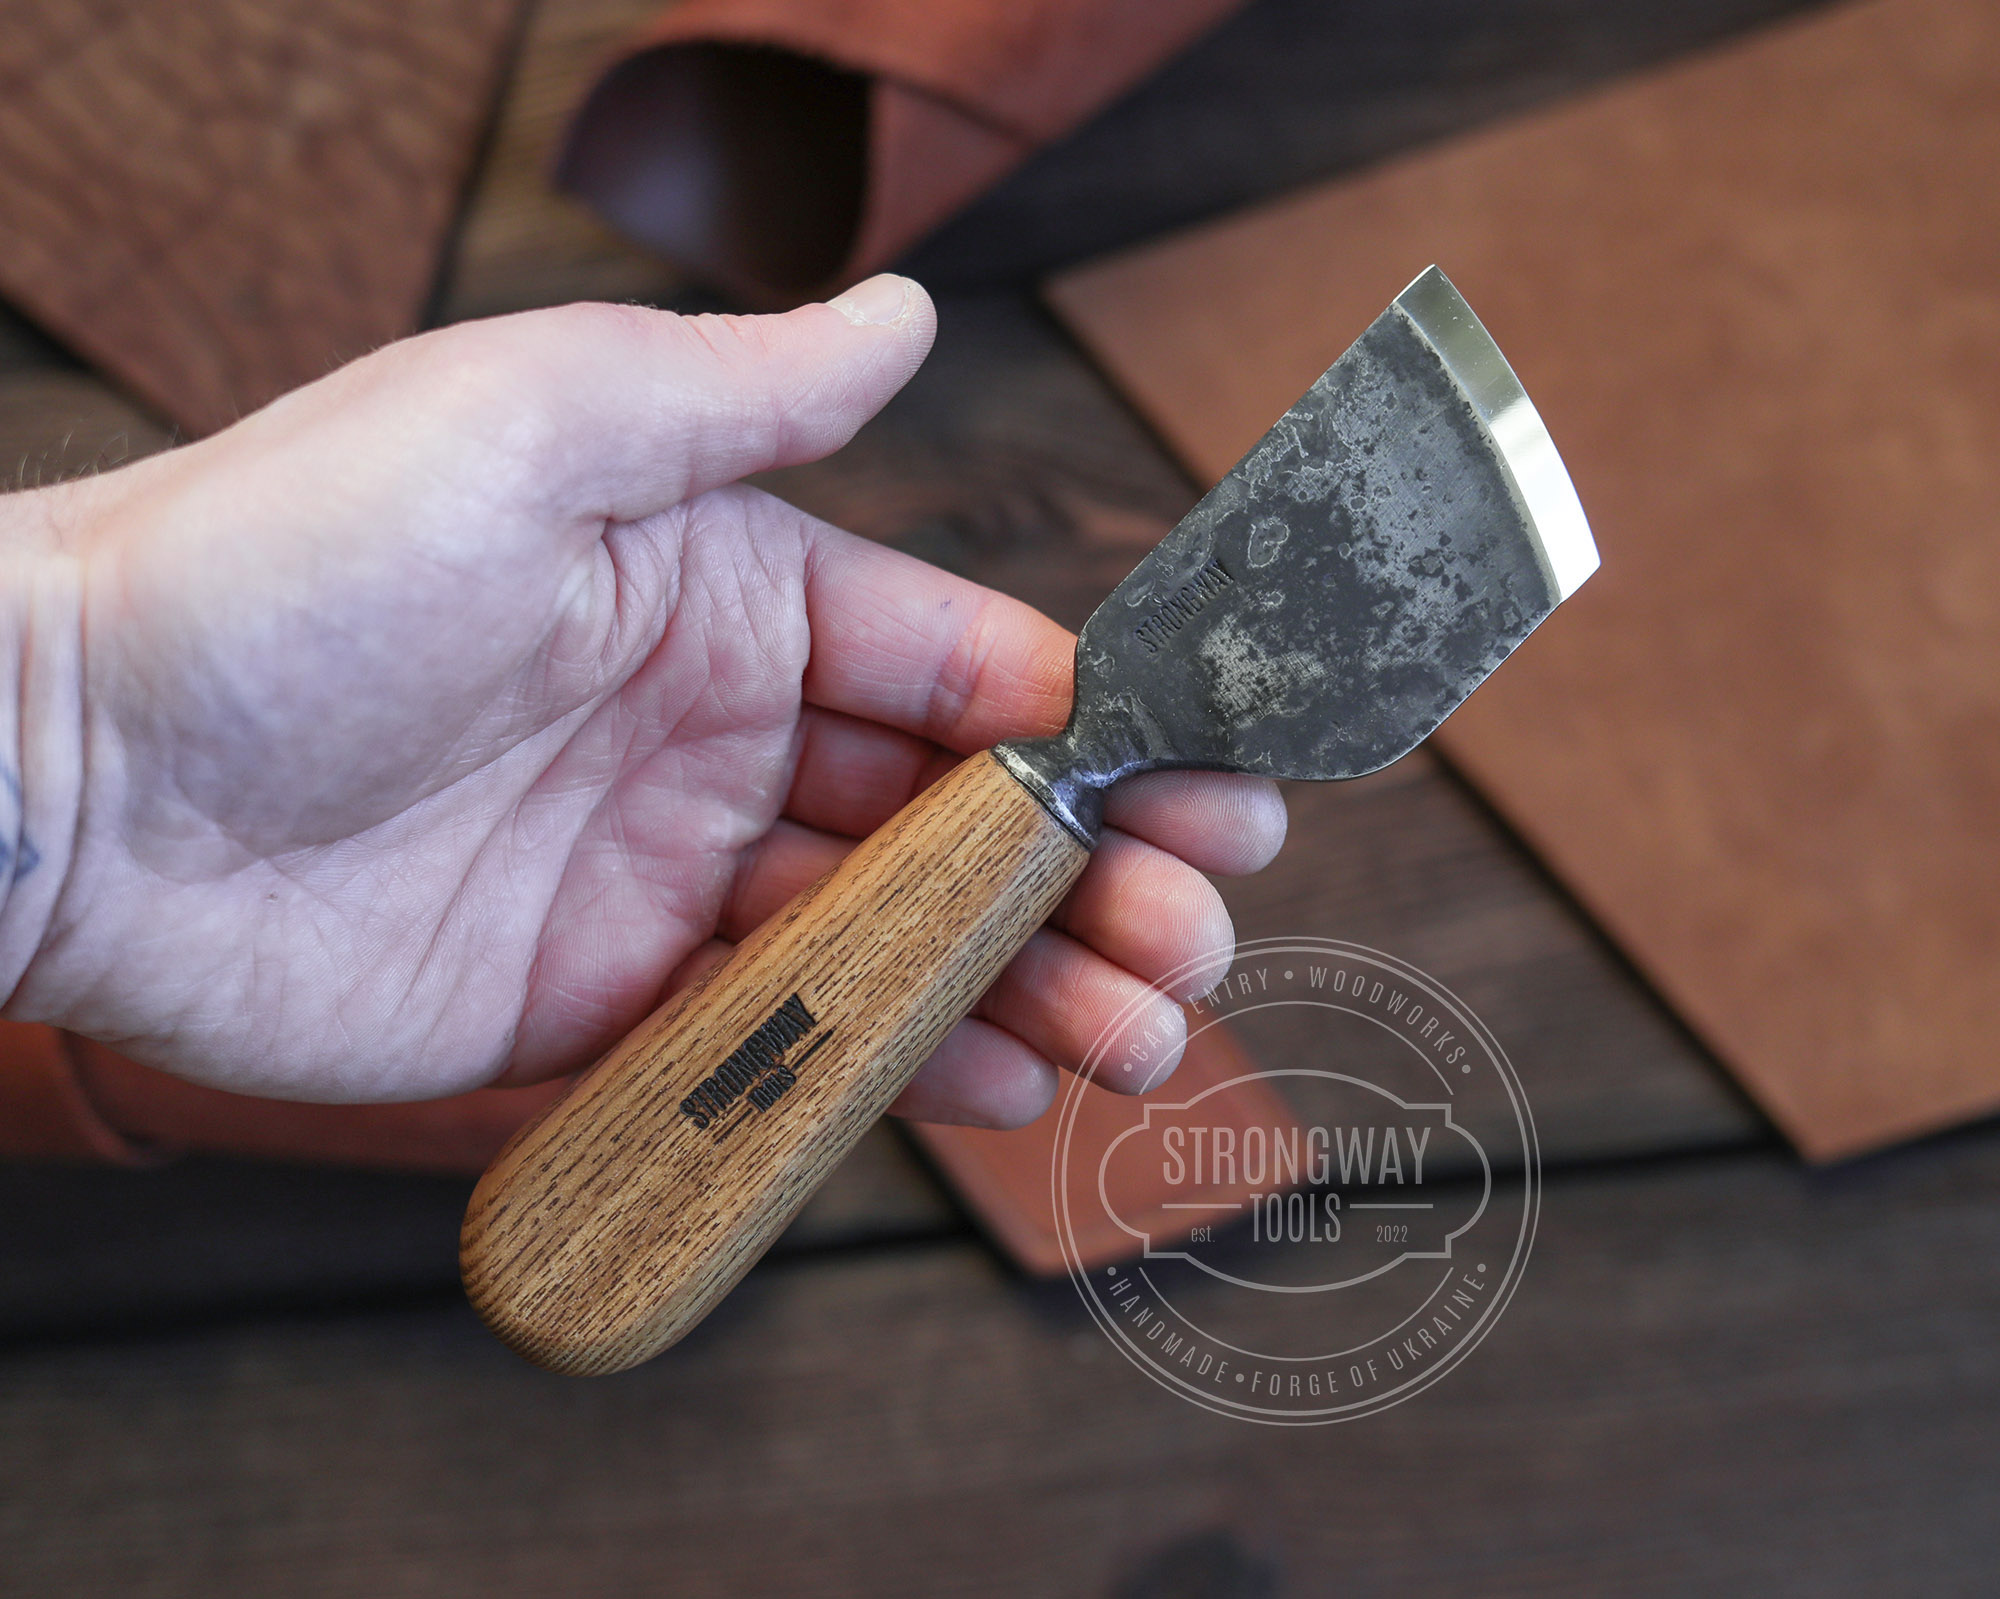 Nerd.blades - Skiving knife for leather work